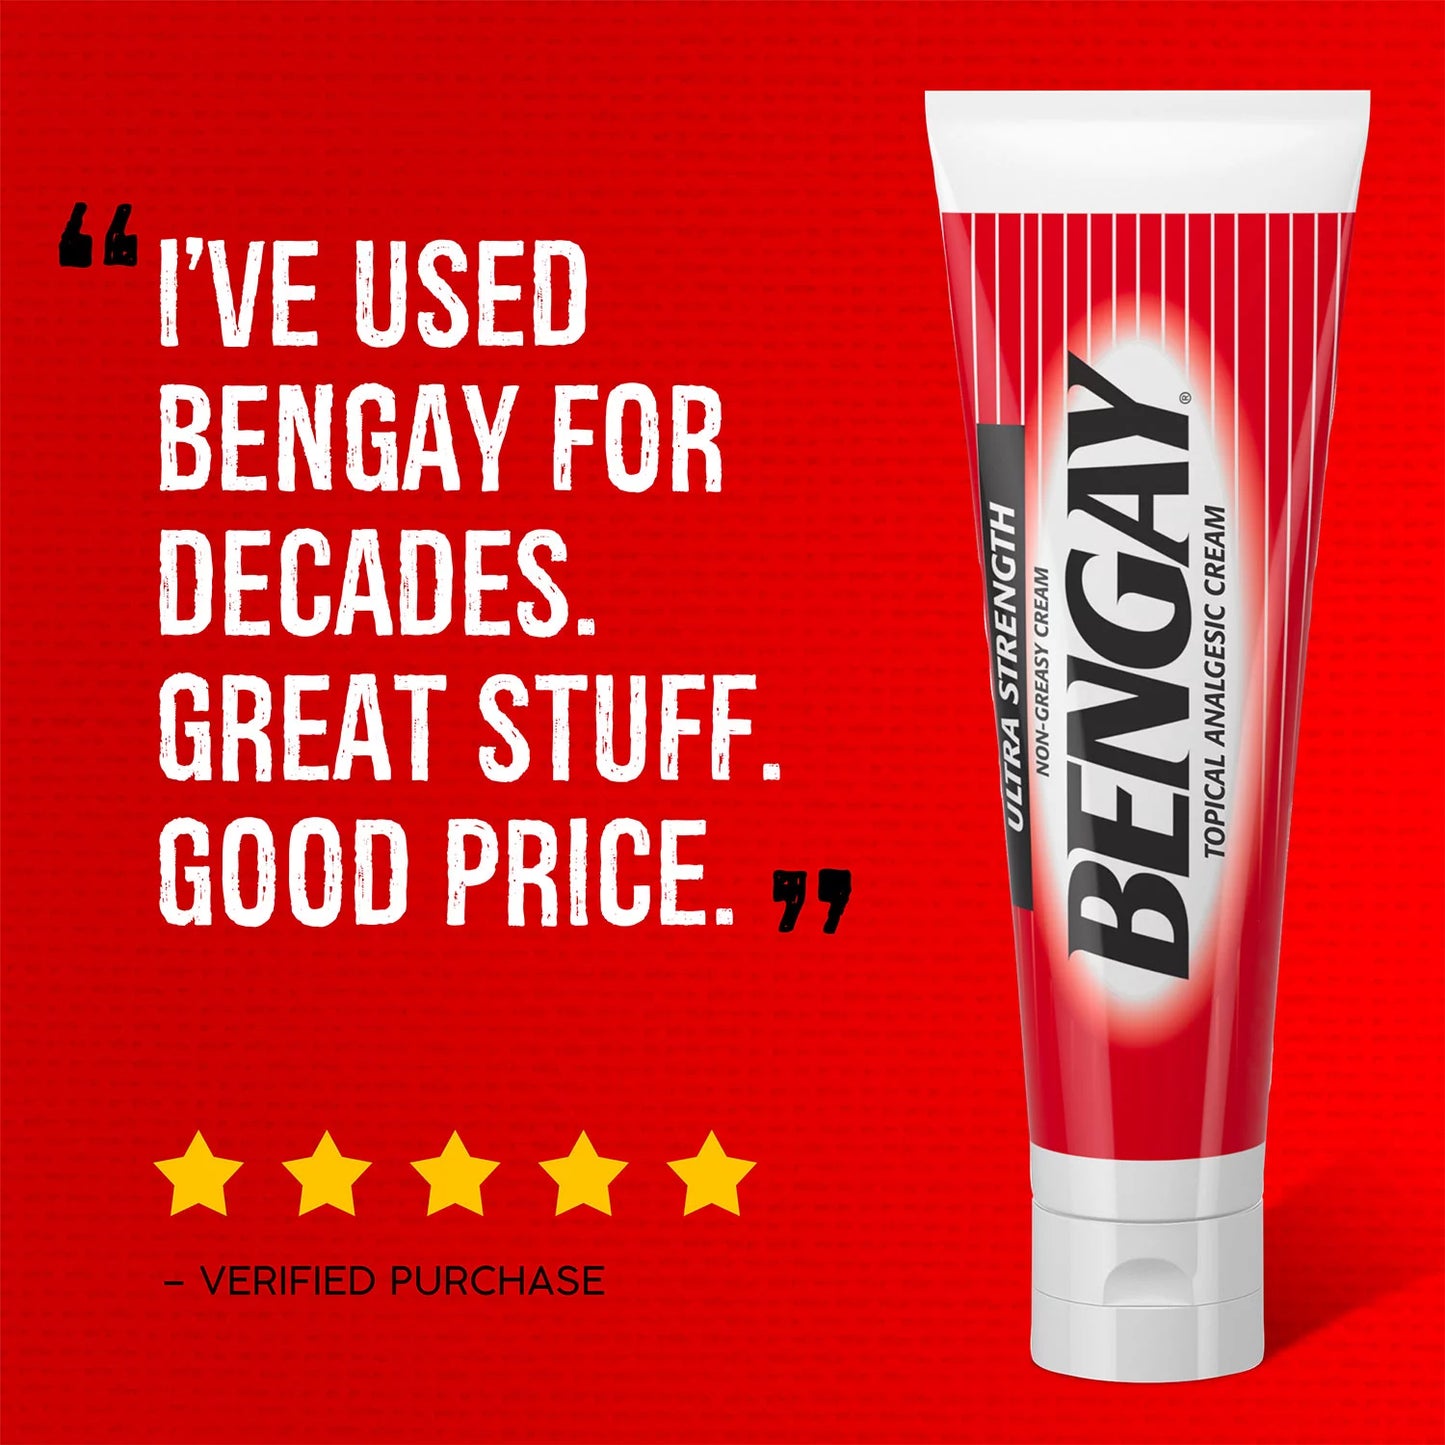 Bengay Ultra Strength Pain Relieving Cream (4 oz., 2 ct.)